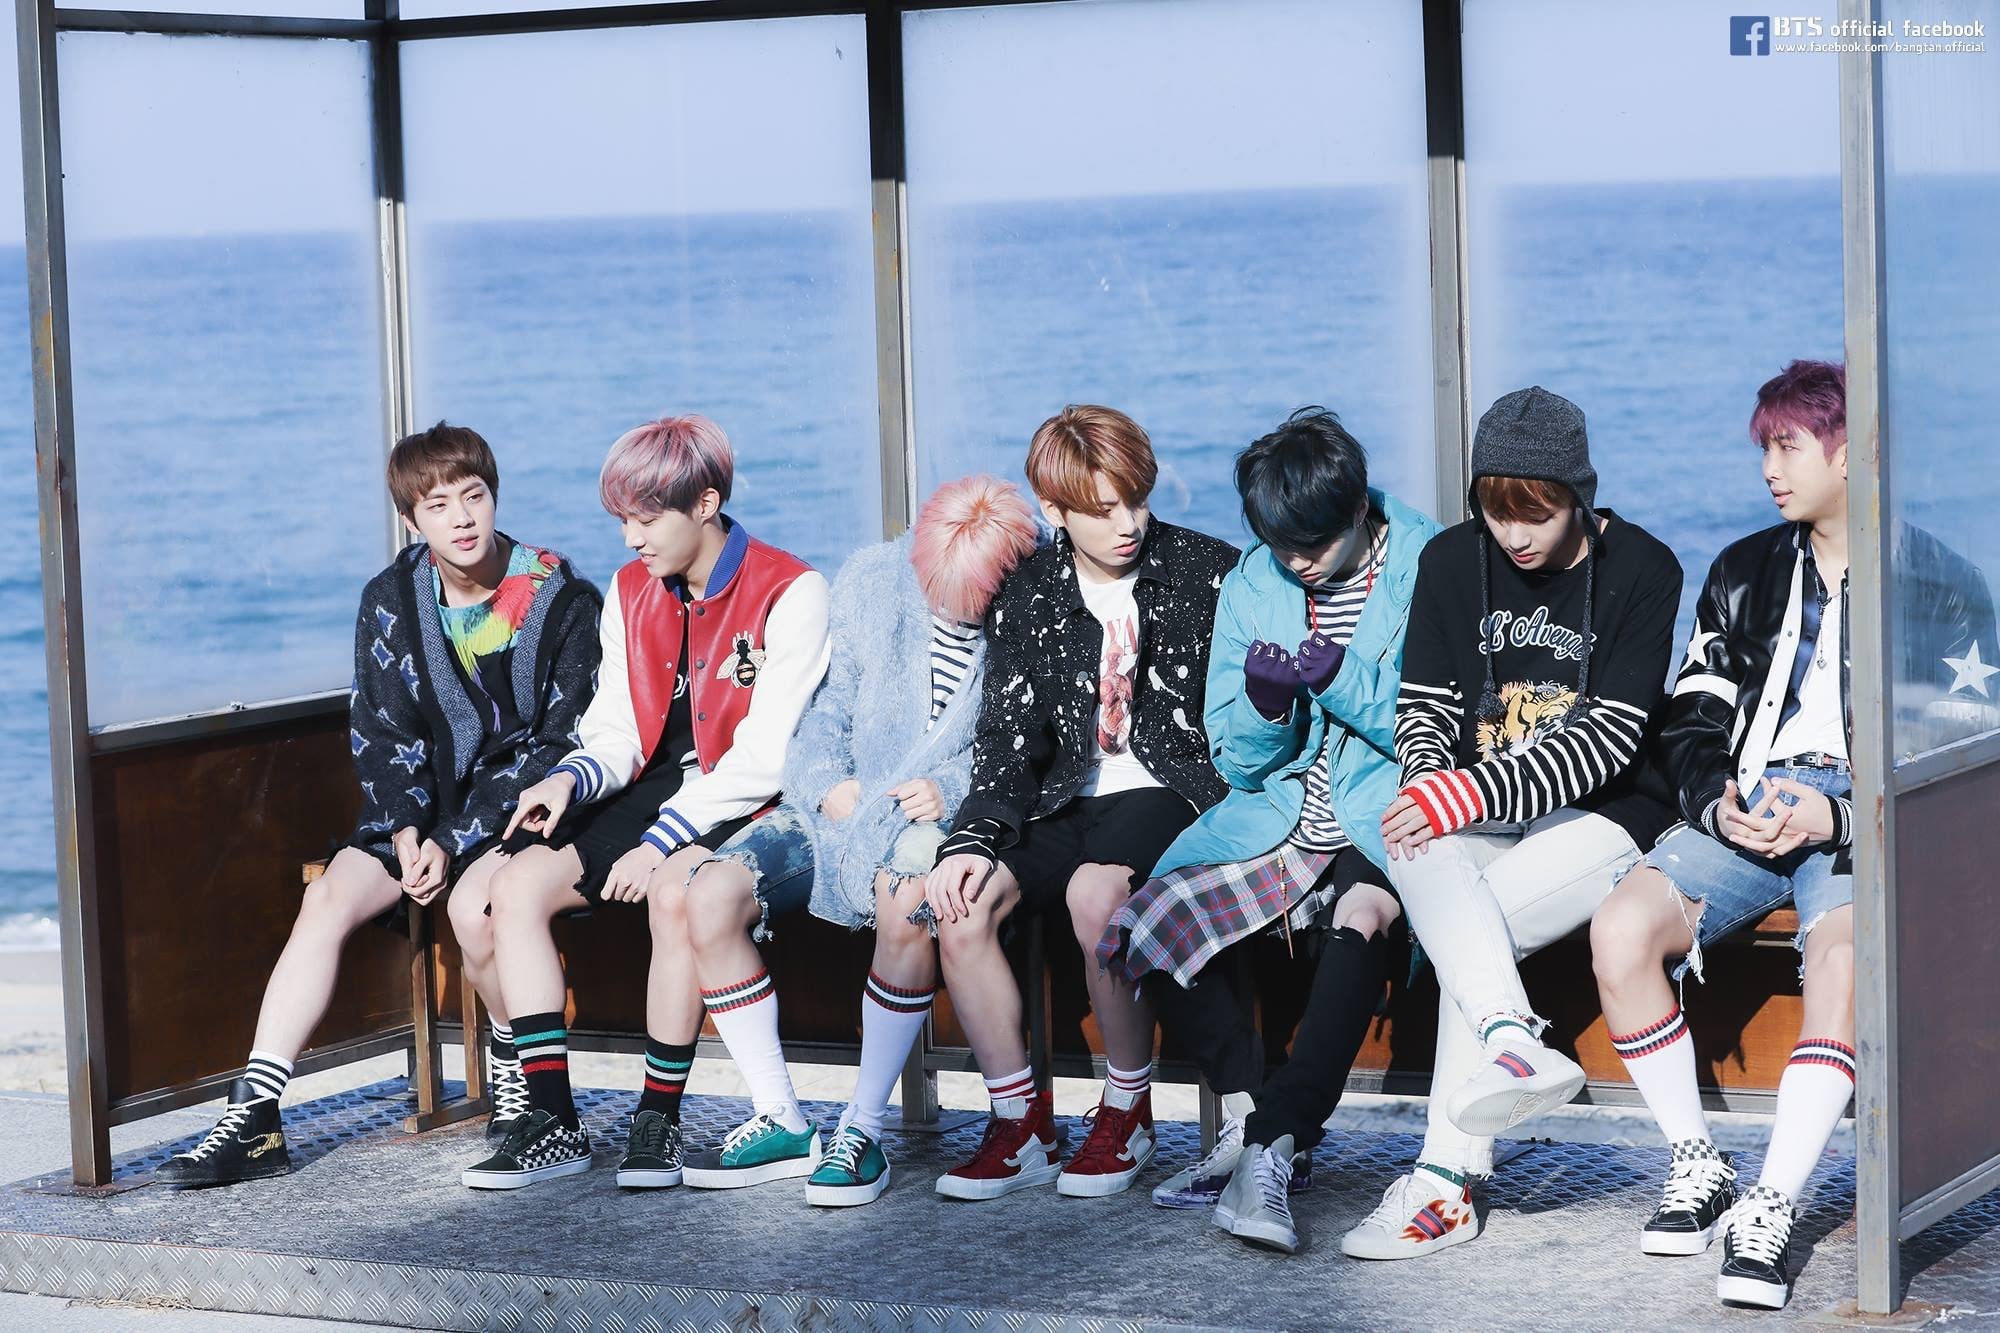 “Spring Day" has surpassed 500 million streams on Spotify, BTS’ 12th song to do - 210624